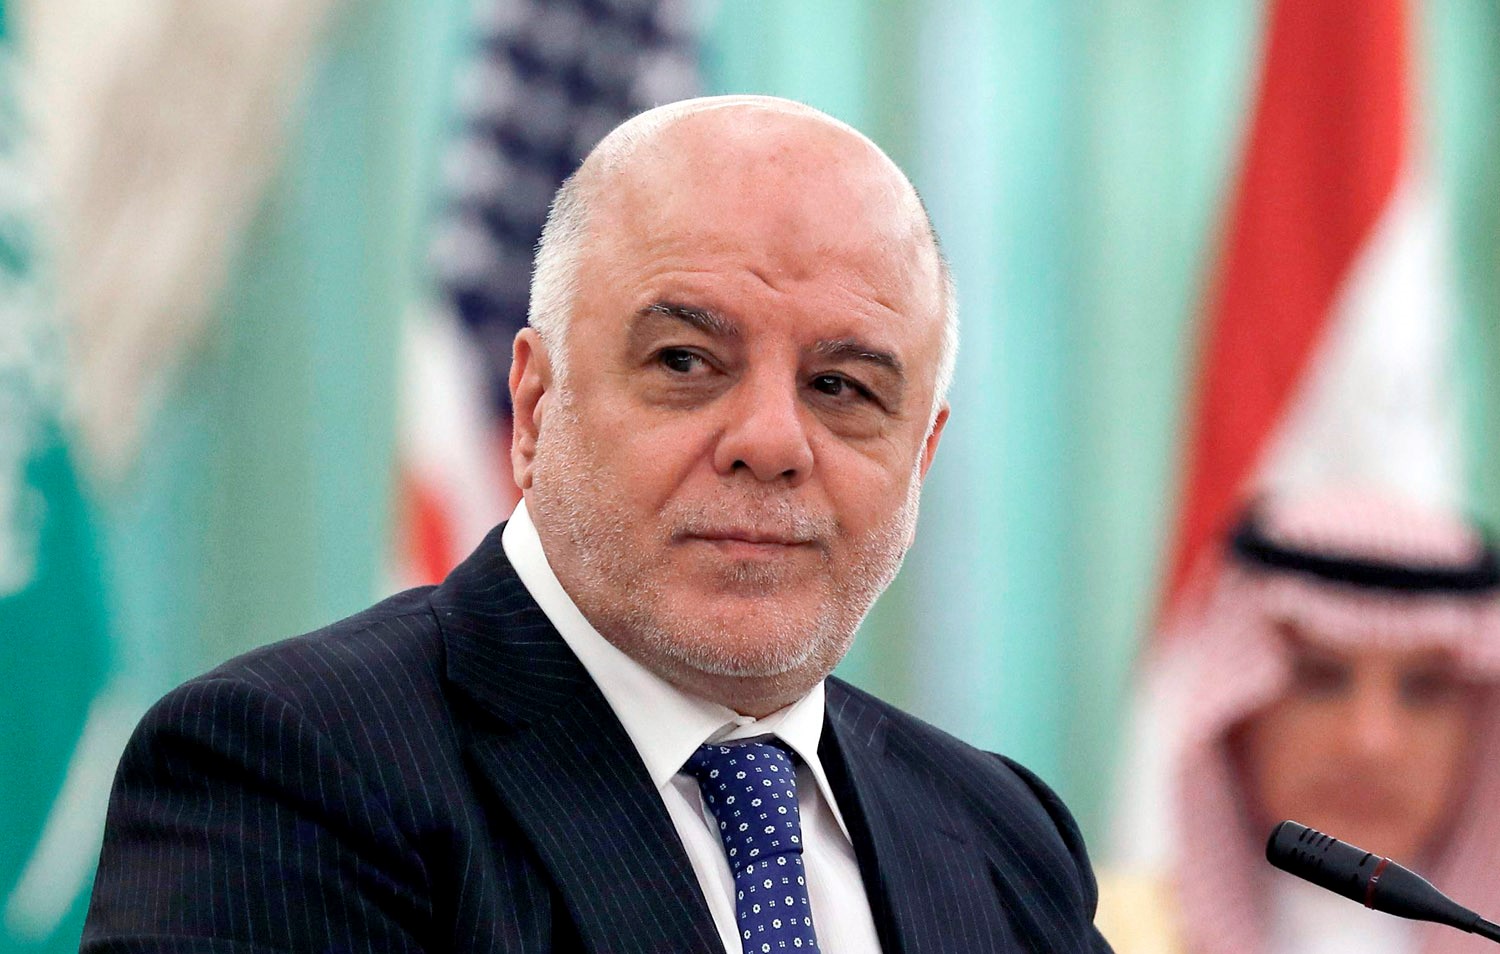 State Forces put the name of Al-Abadi as a consensual candidate for prime minister